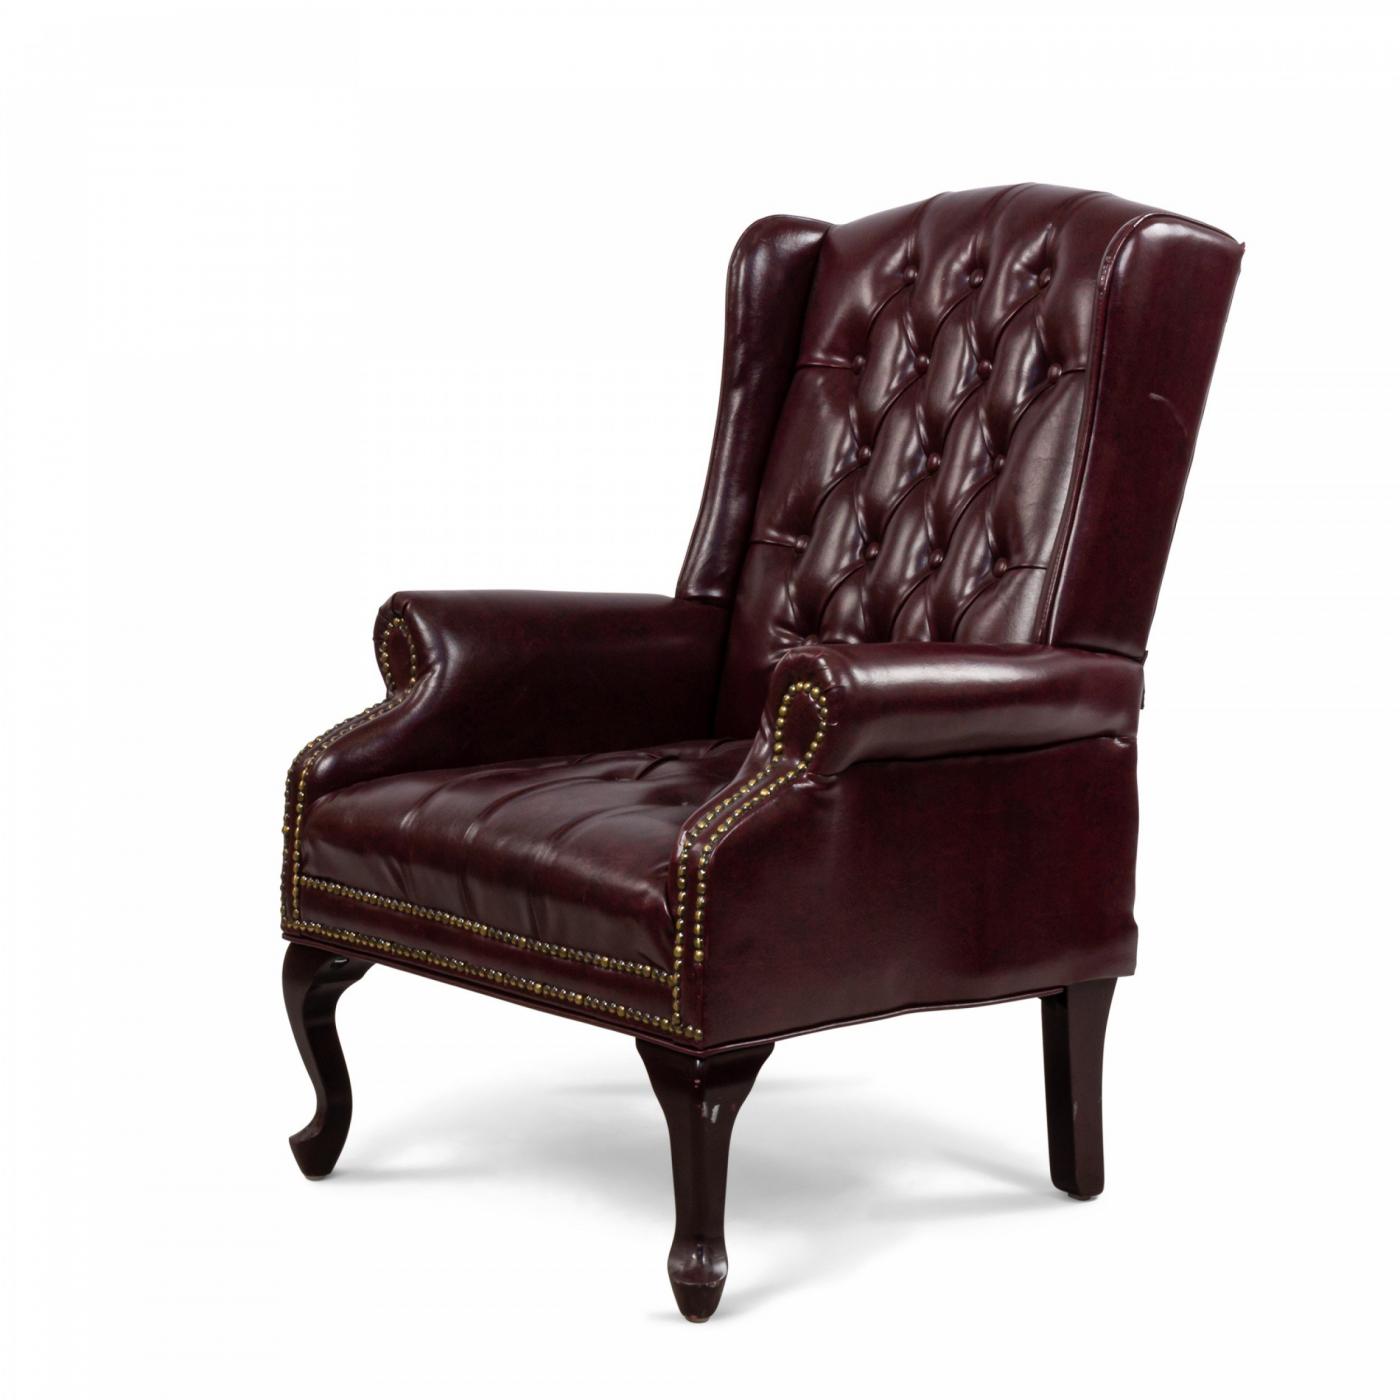 Pair Of Burgundy Tufted Leather Wing Back Chairs 372778 1424707 